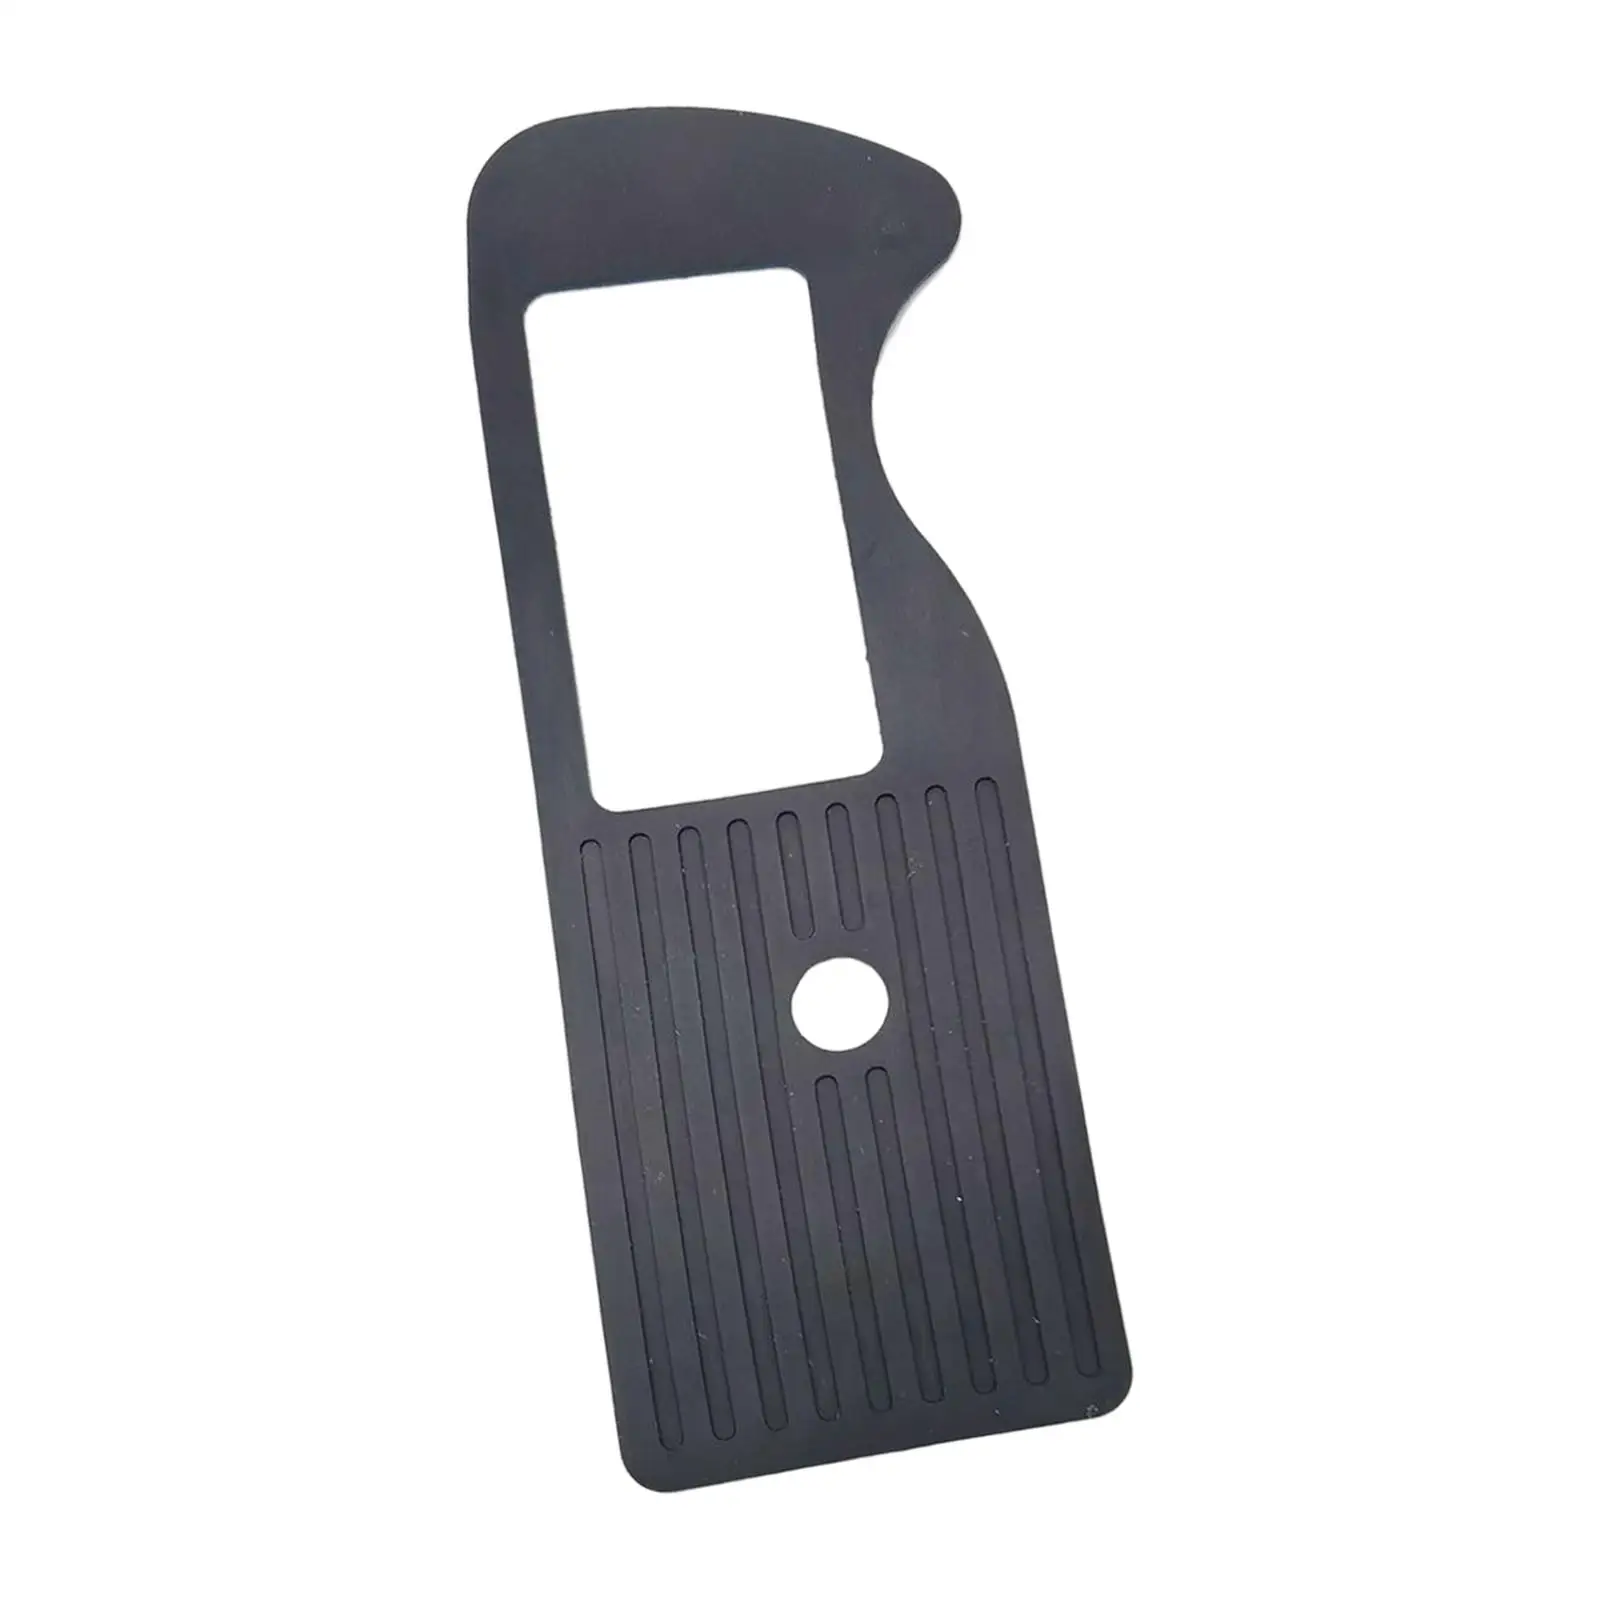 Professional Body Bottom Rubber Cover Repair Part for D3 D3S D3x Camera Accessories